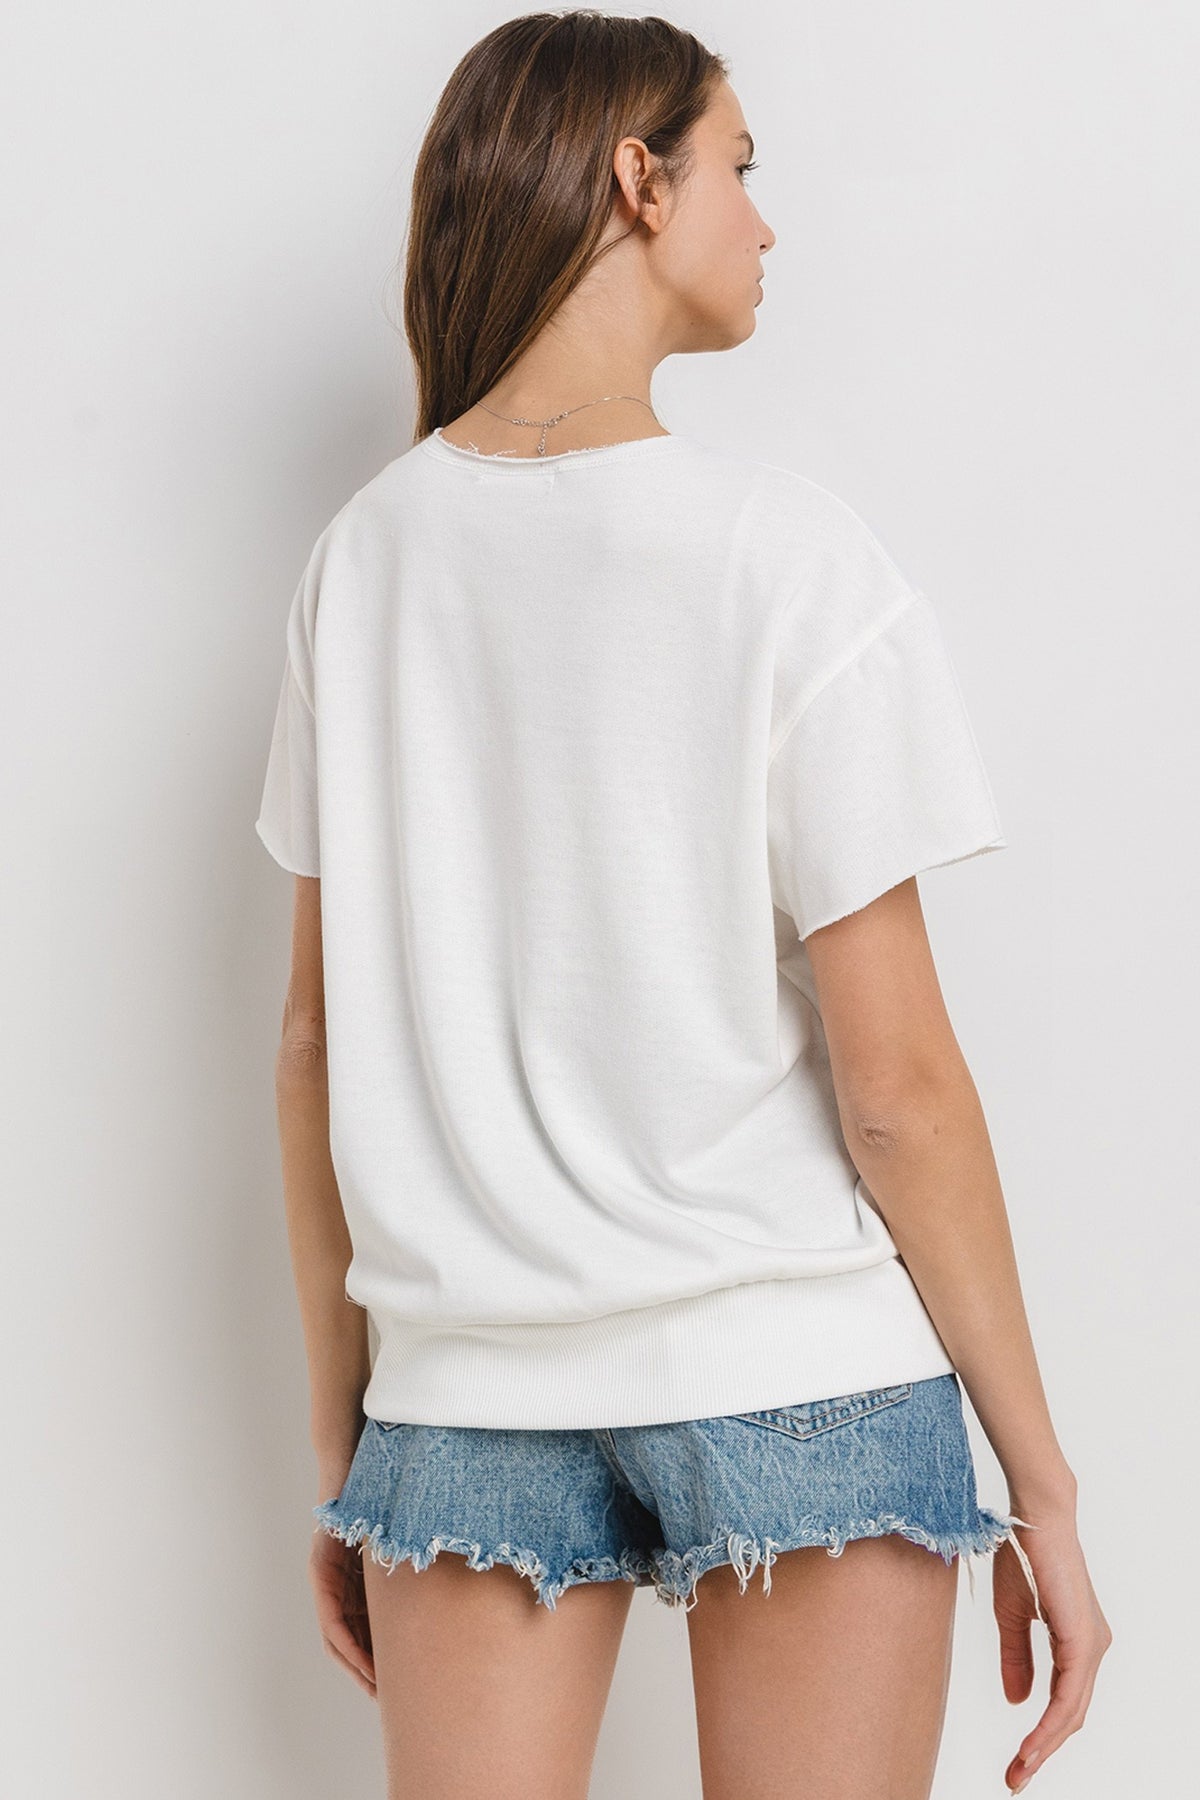 usa t-shirt in white-back  view